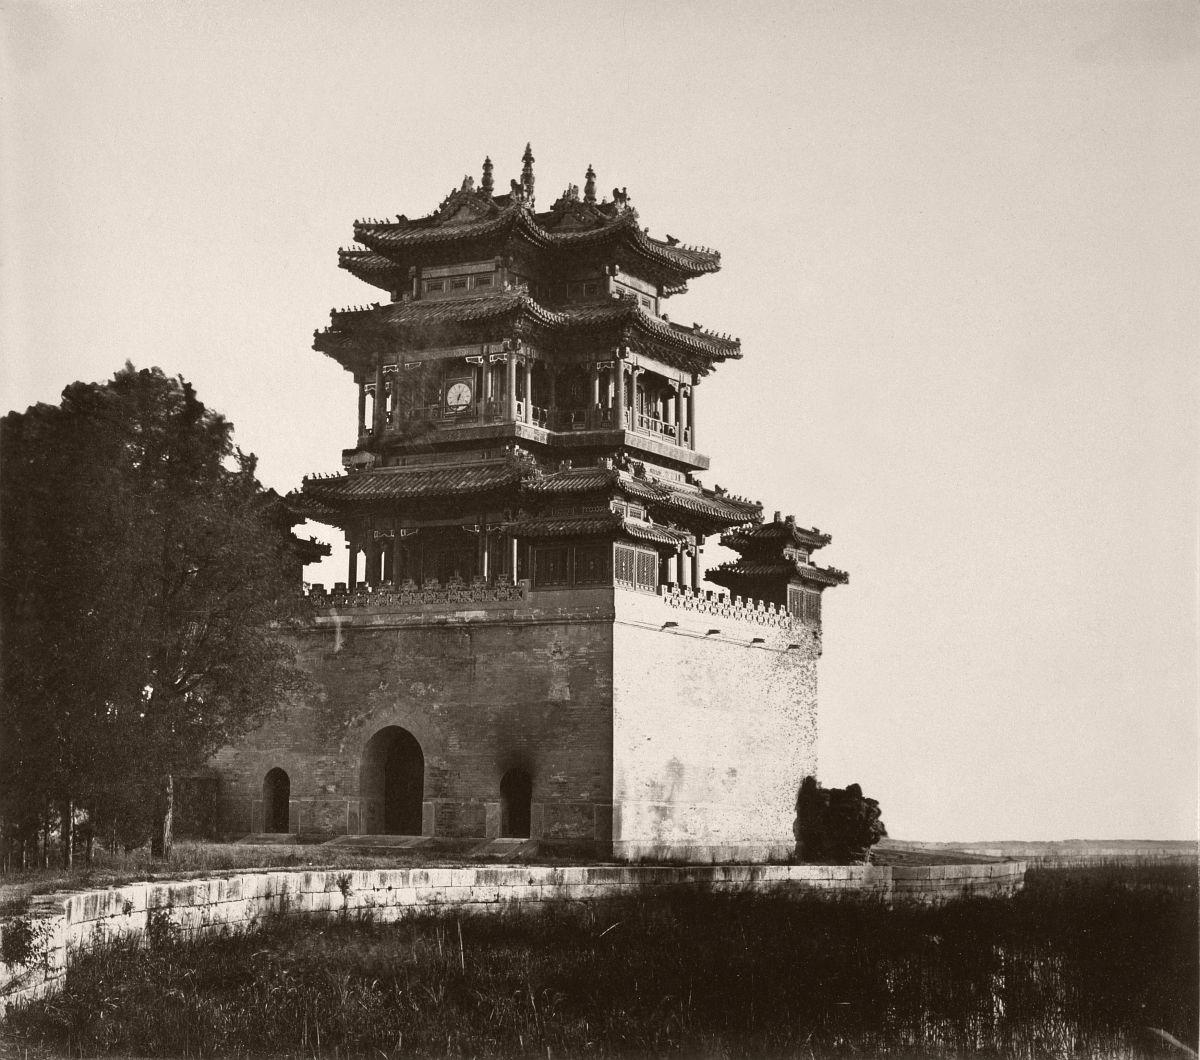 Wenchang Pavilion aka. Wenchang Tower (文昌阁) of the Summer Palace (Yihe Yuan), before being burnt down, October 1860